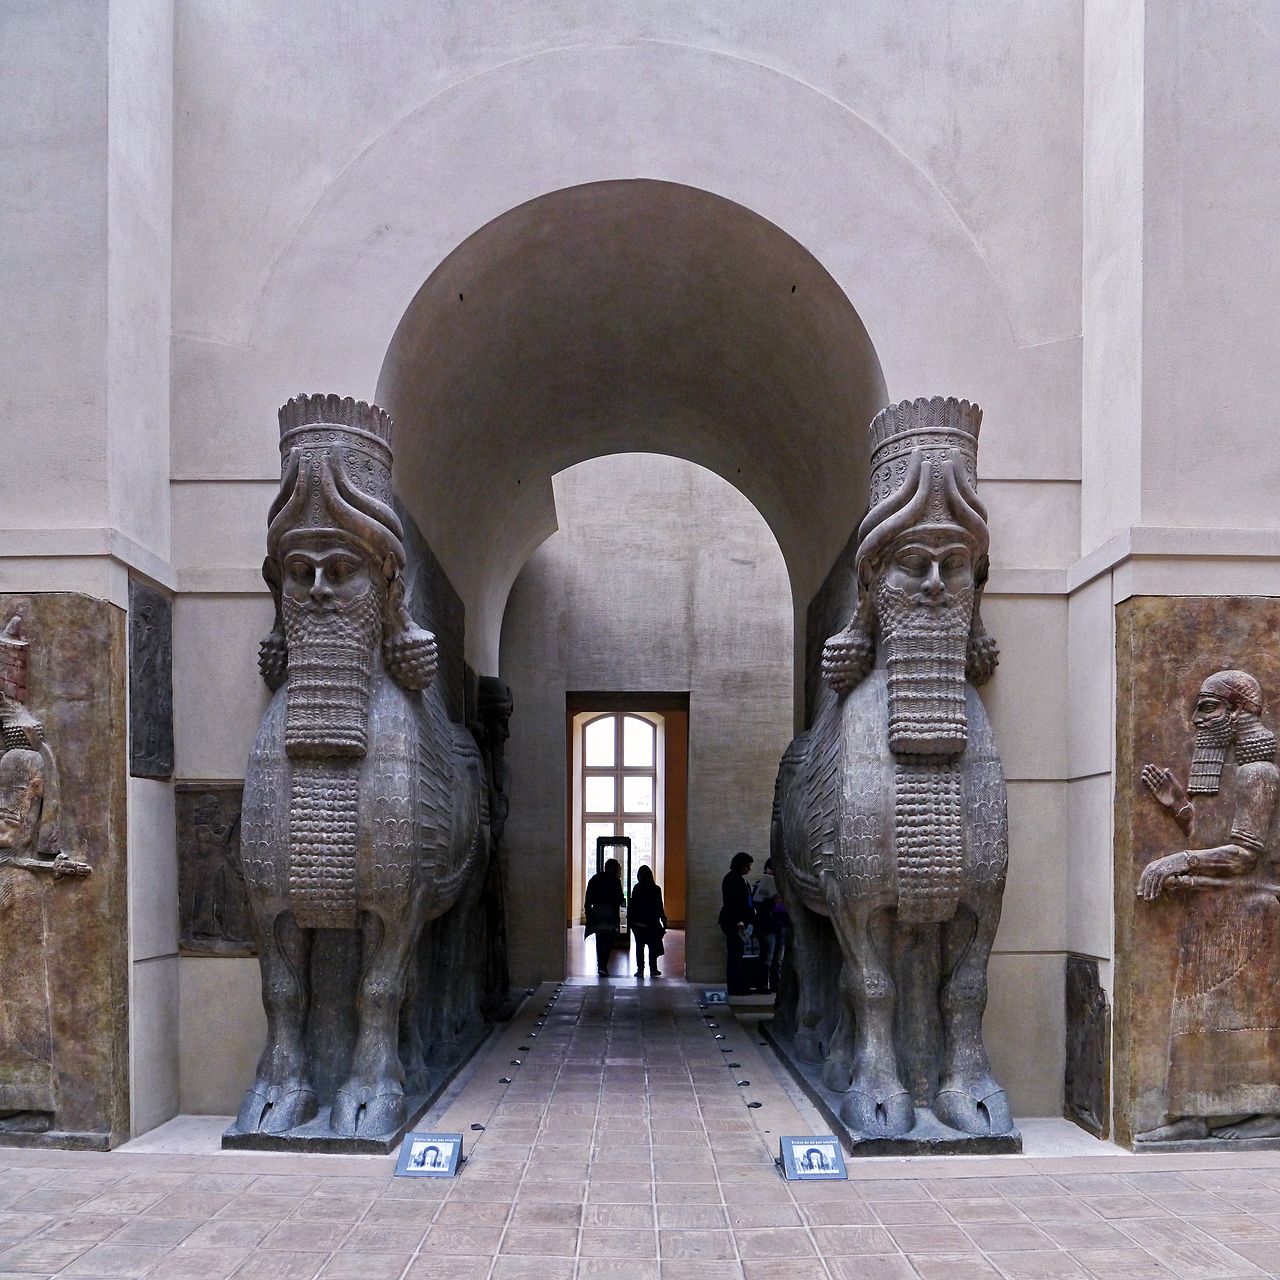 Human-headed bulls gate from the Louvre